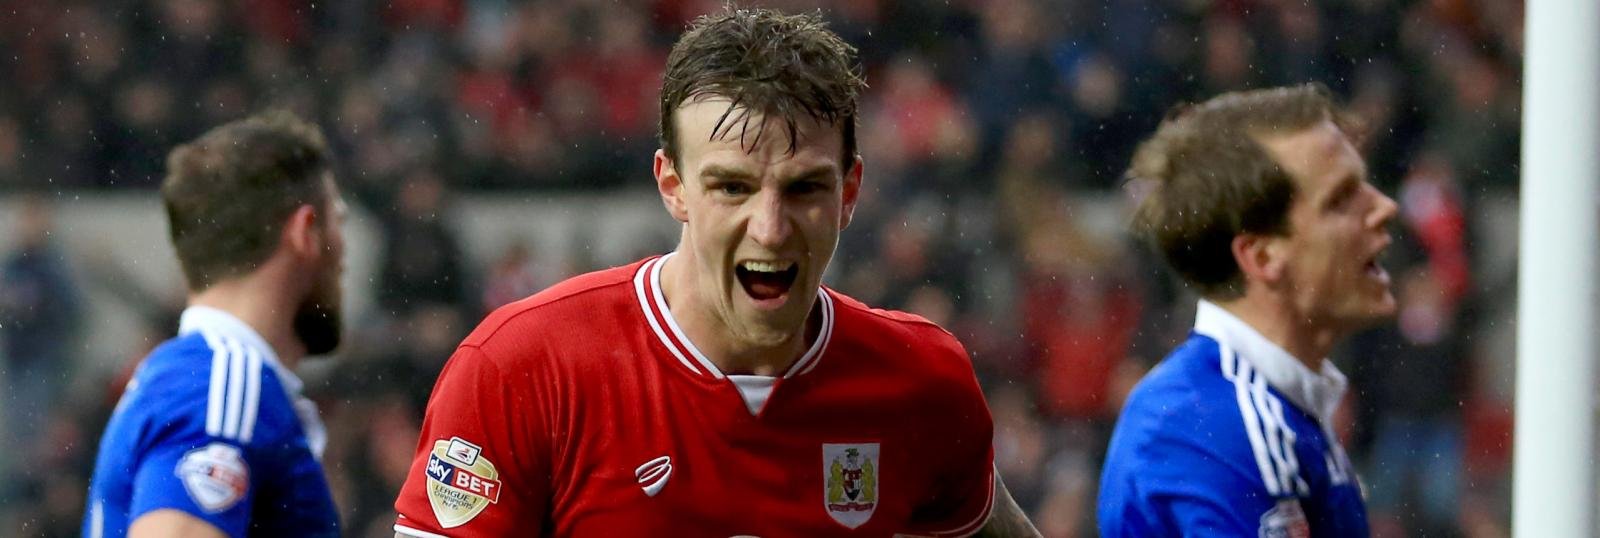 Bristol City’s £2.5m-rated star being tracked by Everton, West Brom and Aston Villa